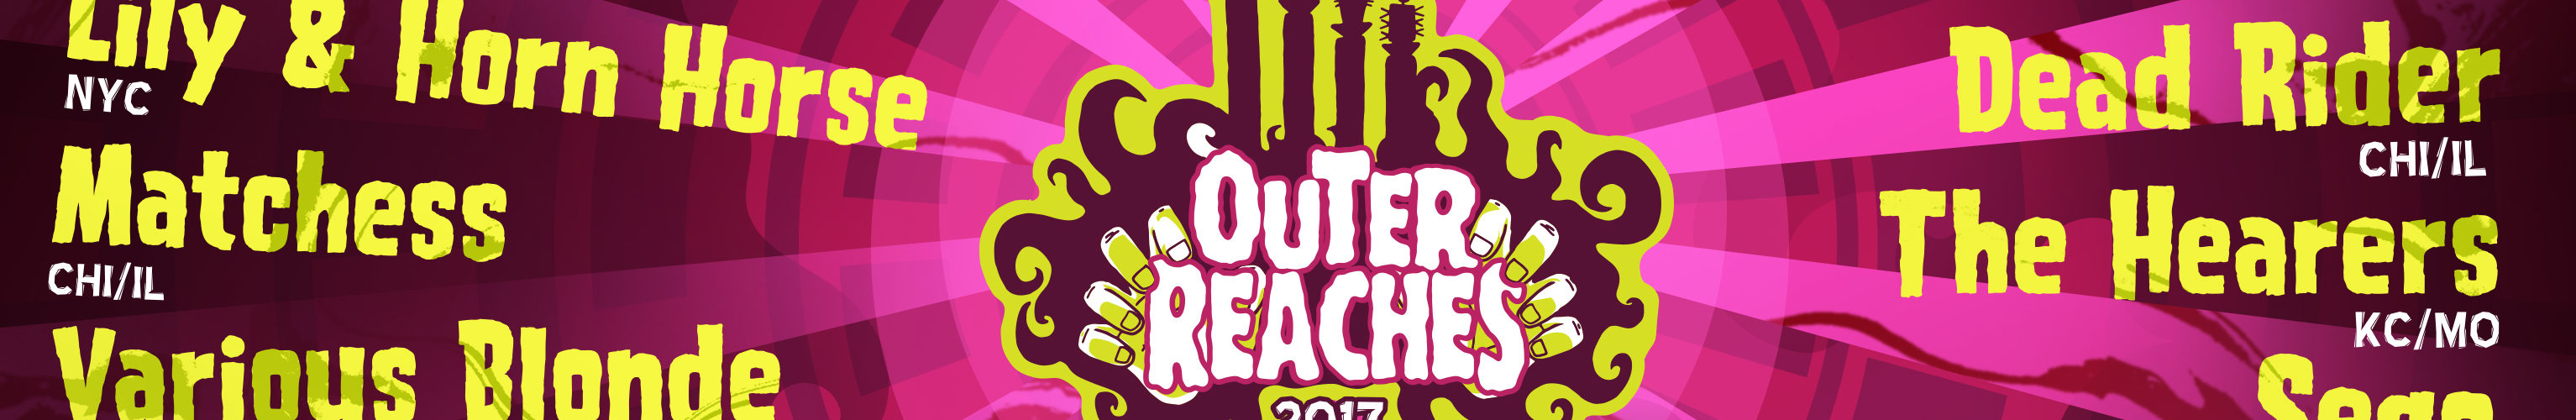 Outer Reaches 2017 (FB Banner)